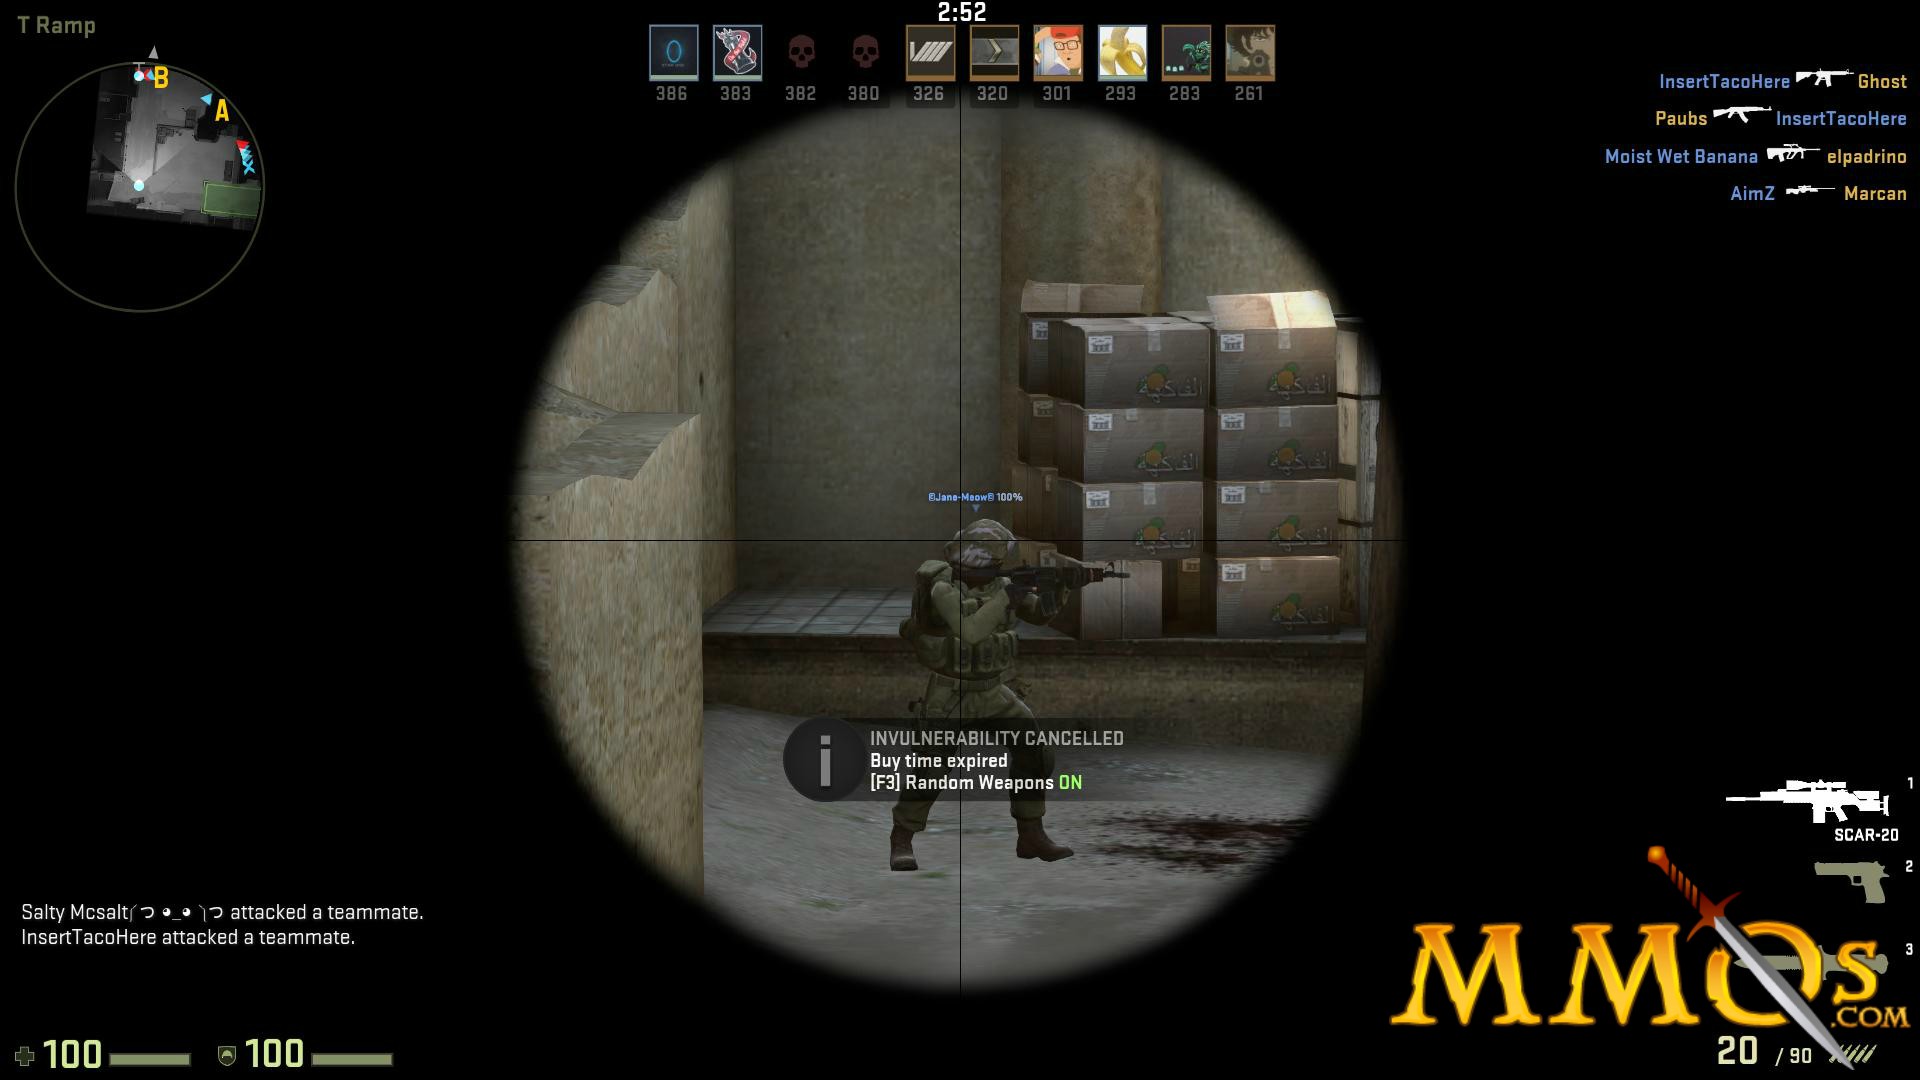 Valve says that not enough players play Counter-Strike 2 on macOS - Xfire